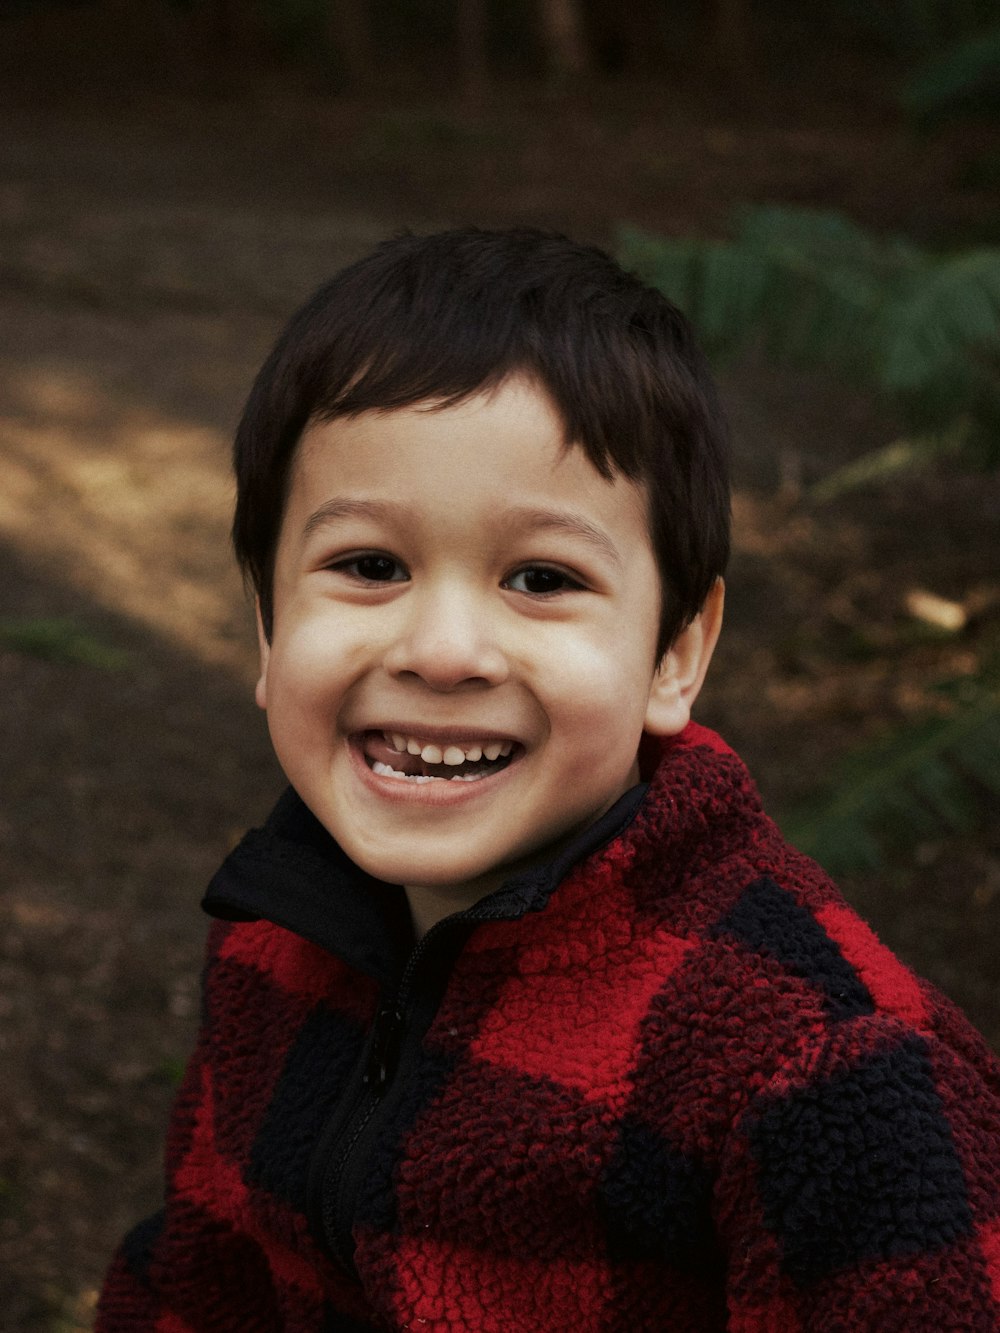 boy in red and black sweater smiling